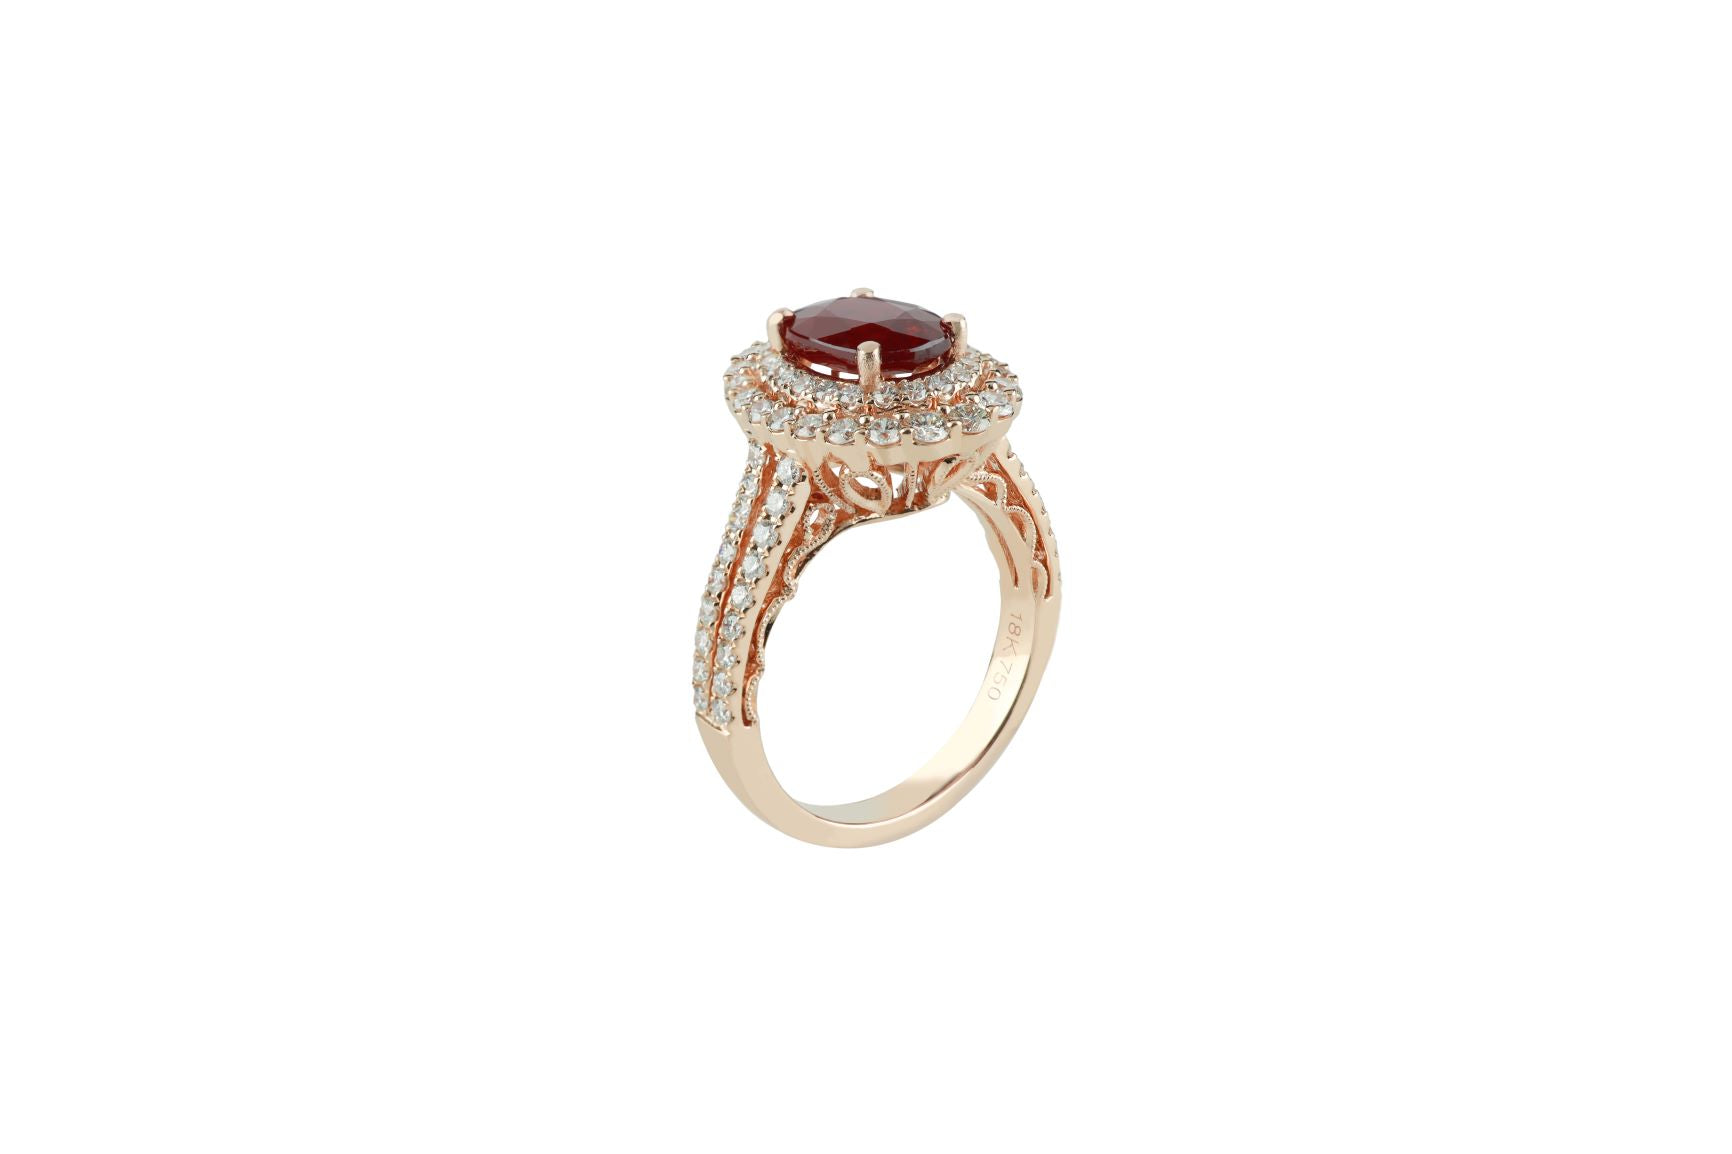 AIG certified natural 1.87 ct Ruby and Diamond Ring 18k